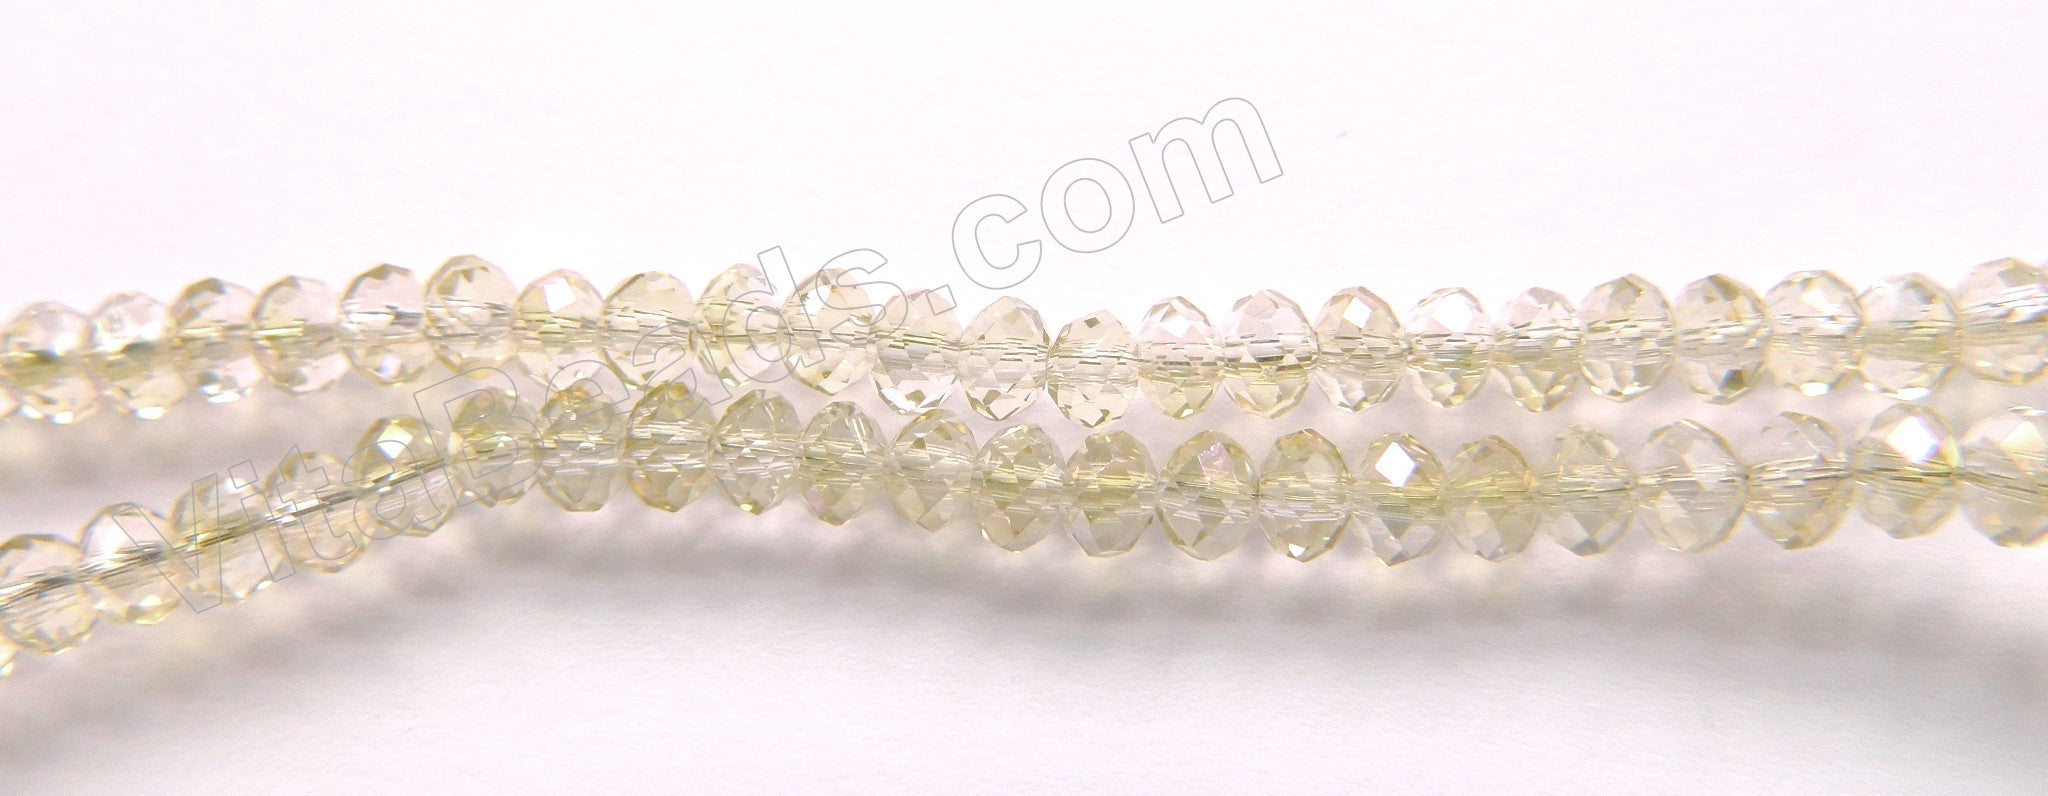 Mystic Light Lemon Crystal  -  Small Faceted Rondel  18"     4 x 3 mm